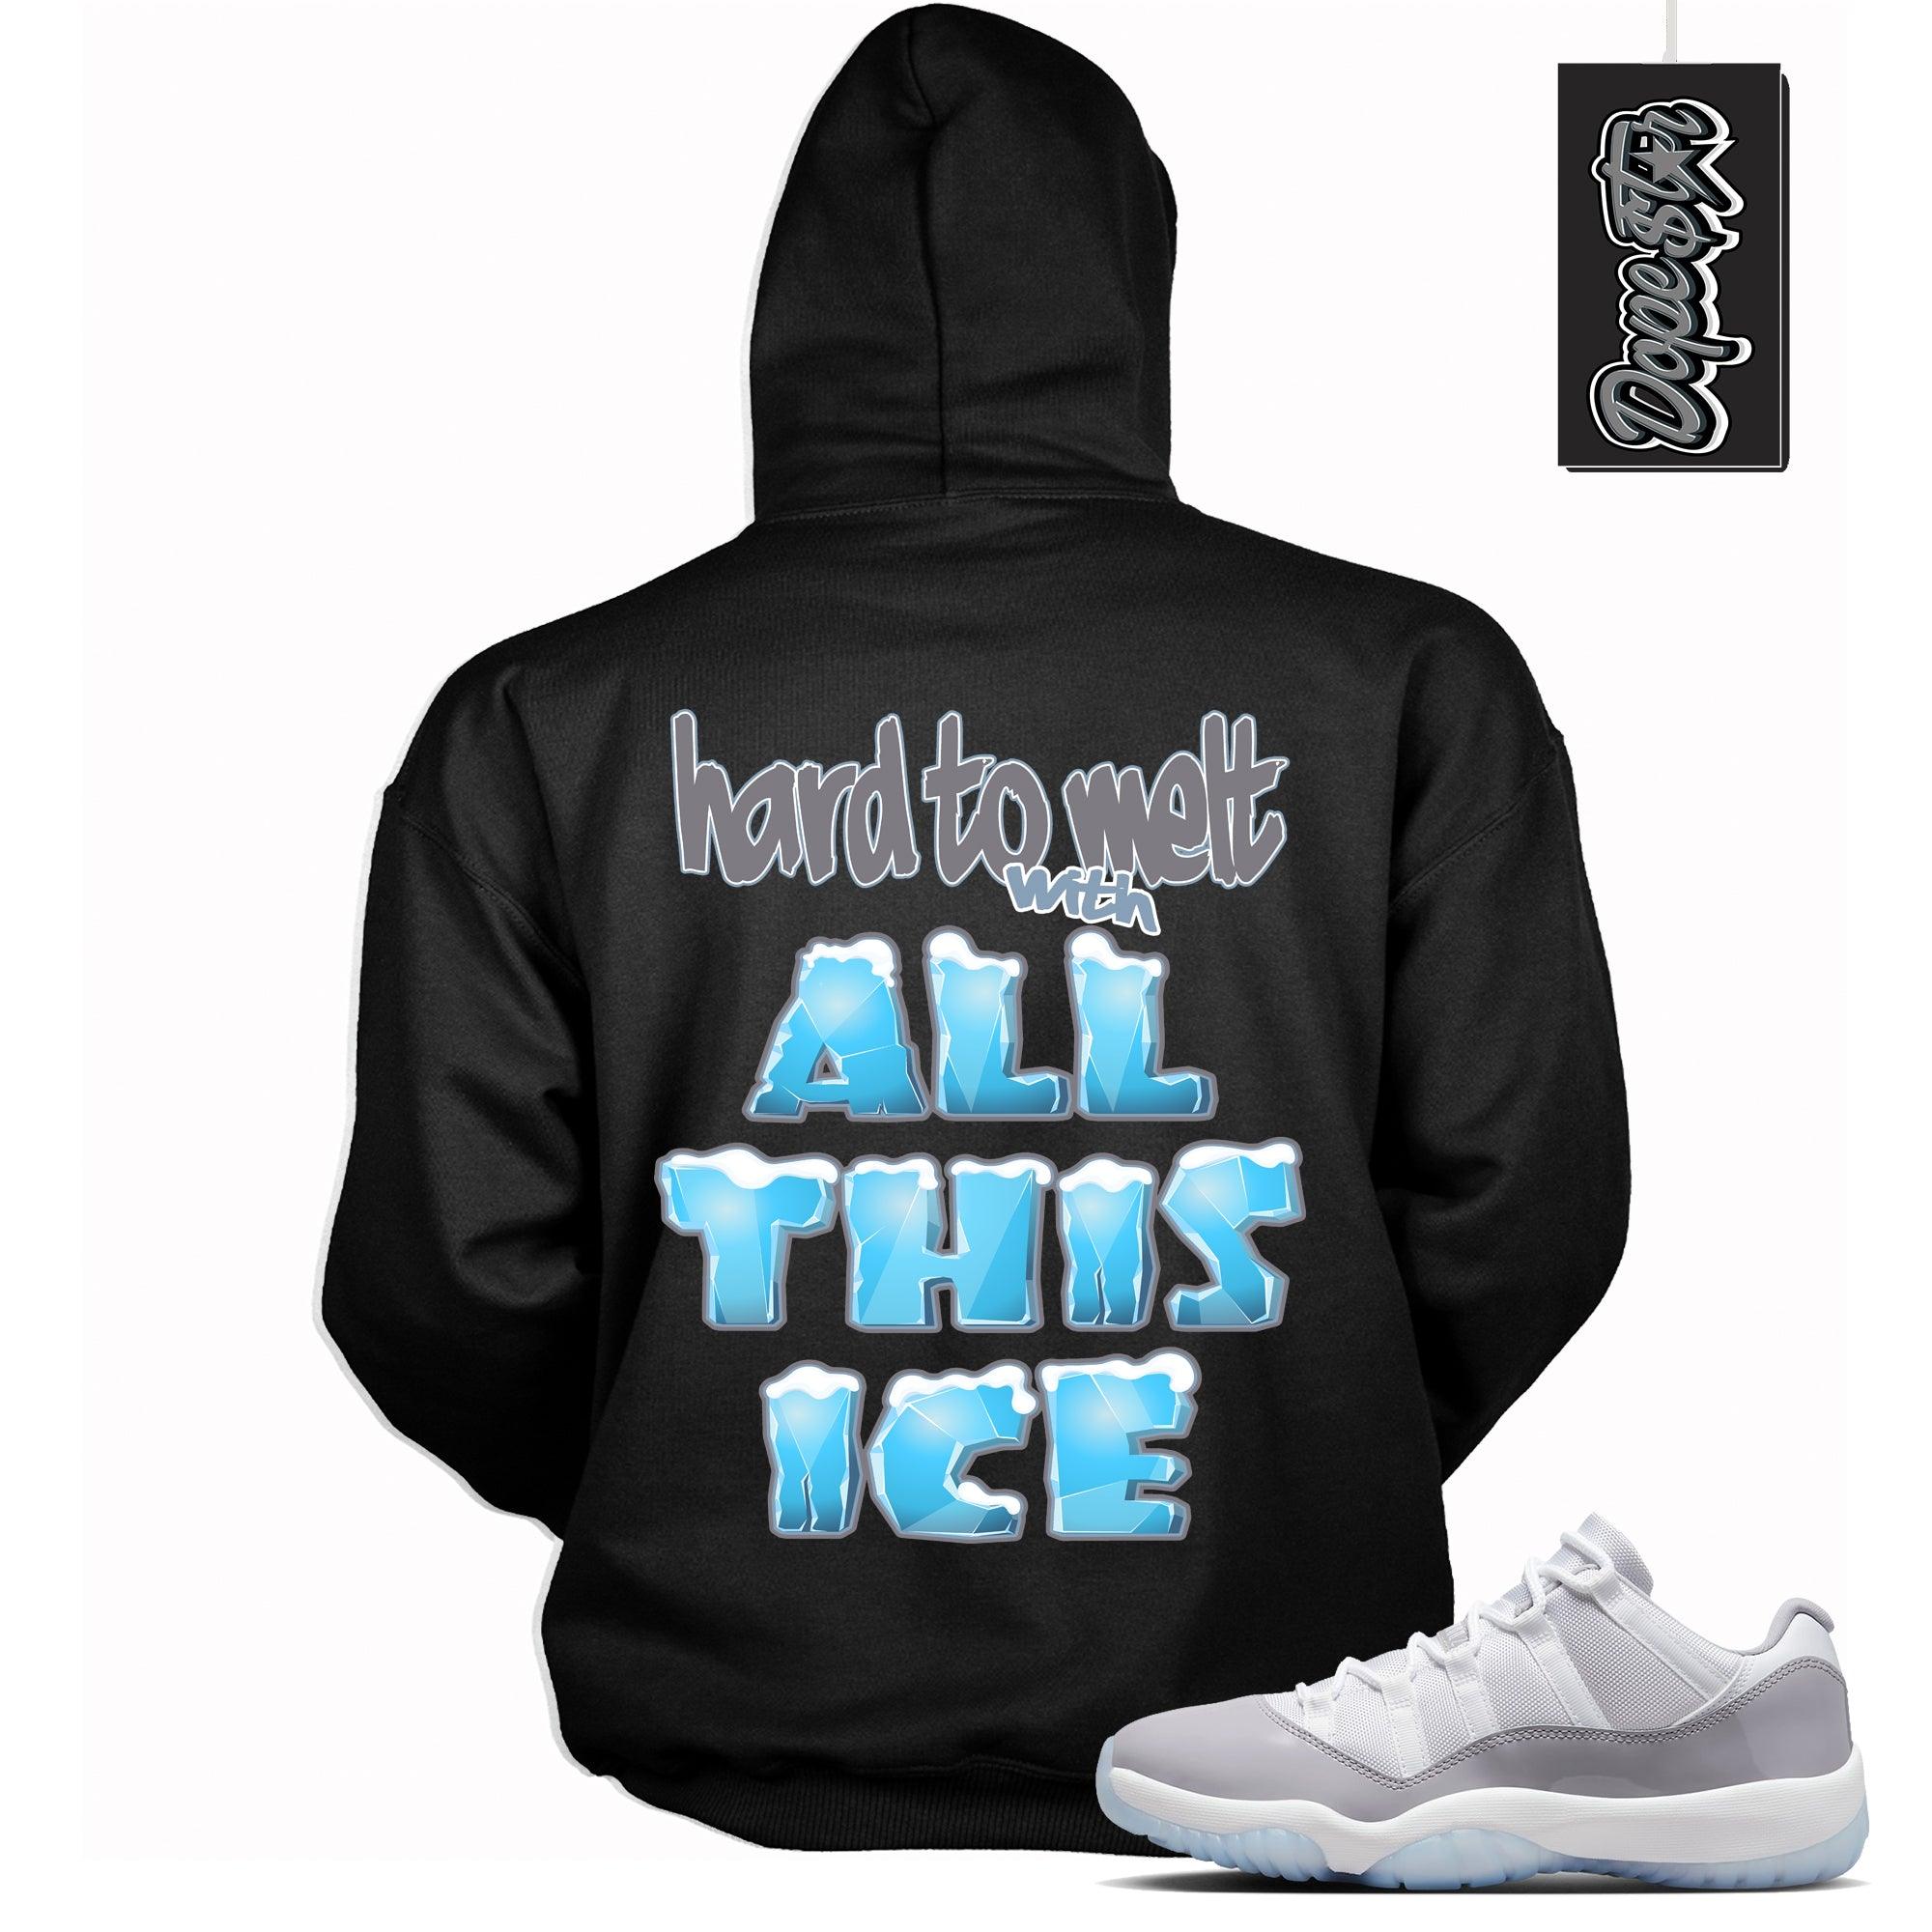 Cool Black Graphic Hoodie with “ All This Ice  “ print, that perfectly matches Air Jordan 11 Retro Low Cement Grey sneakers